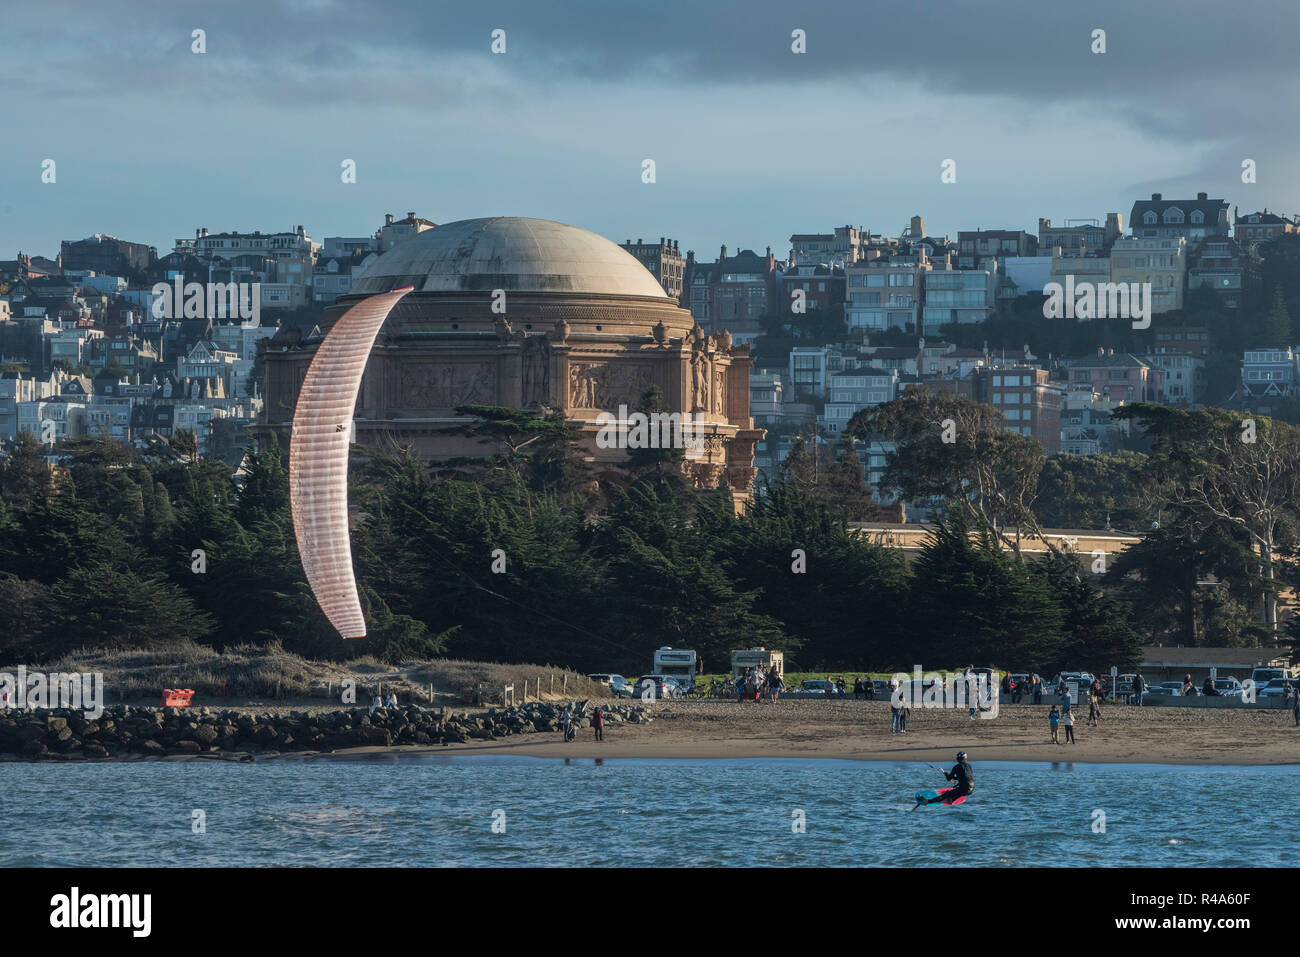 The palace of fine arts theatre as seen from golden gate strait from a boat. Stock Photo